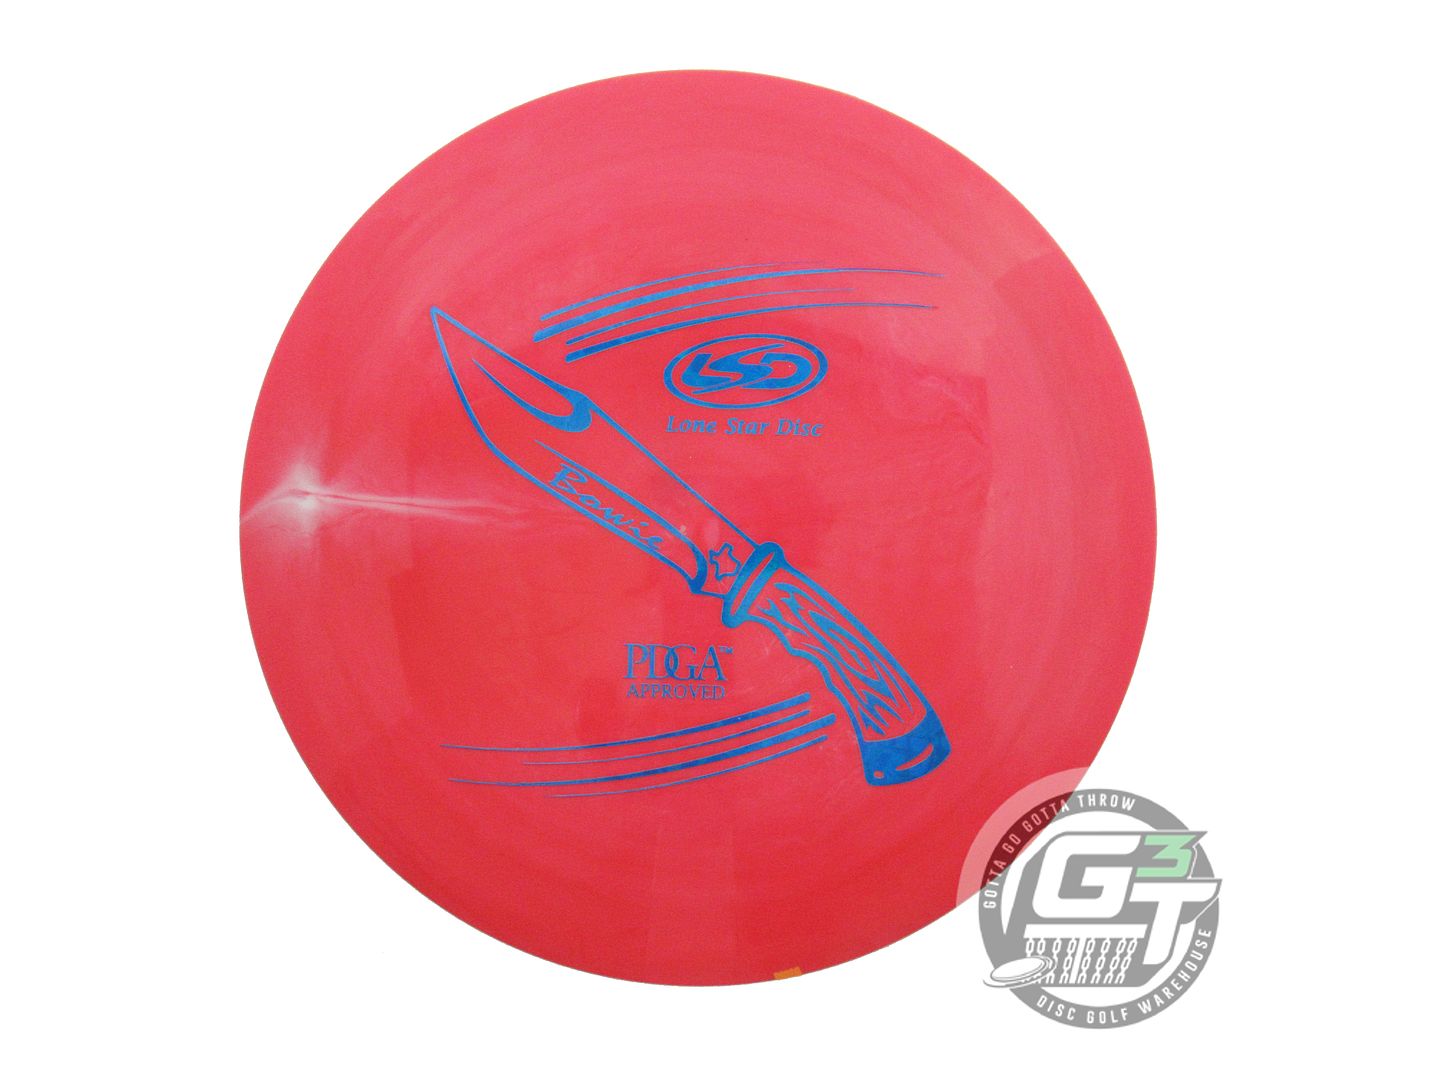 Lone Star Artist Series Alpha Bowie Distance Driver Golf Disc (Individually Listed)